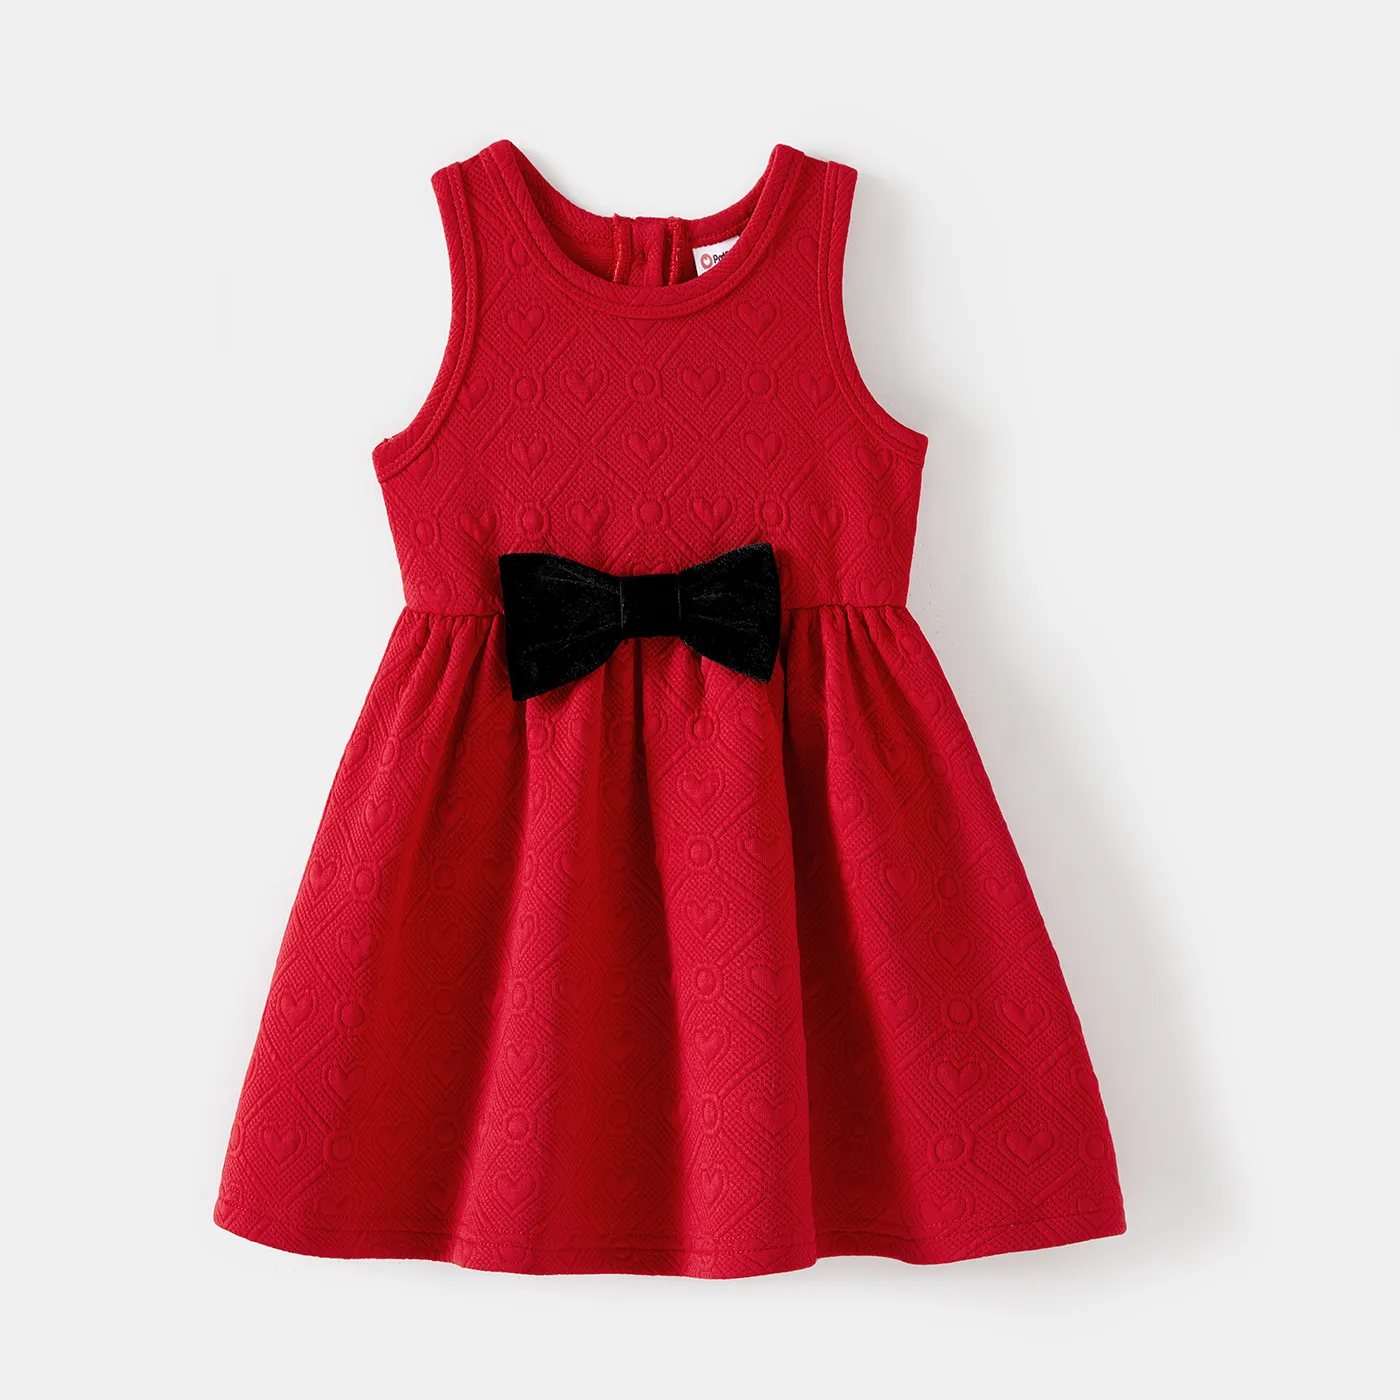 Family Matching Bow Front Red Heart Textured Tank Dresses And Long-sleeve Corduroy Shirts Sets